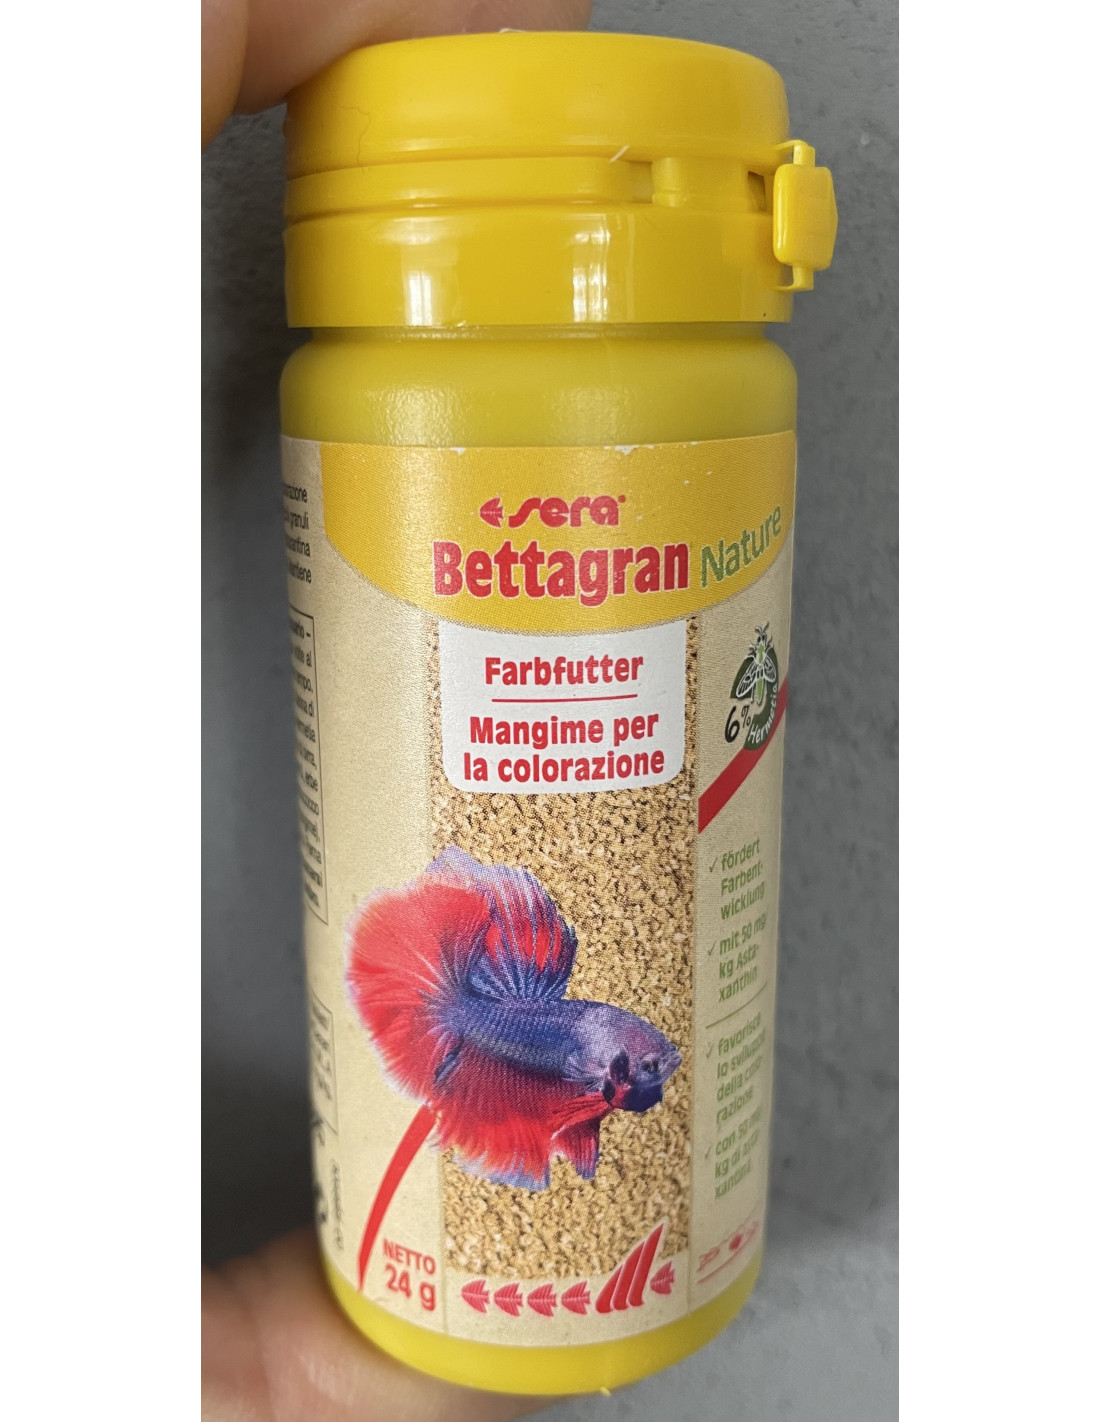 DENNERLE Betta Booster 30ml Aliment complet poissons combattants